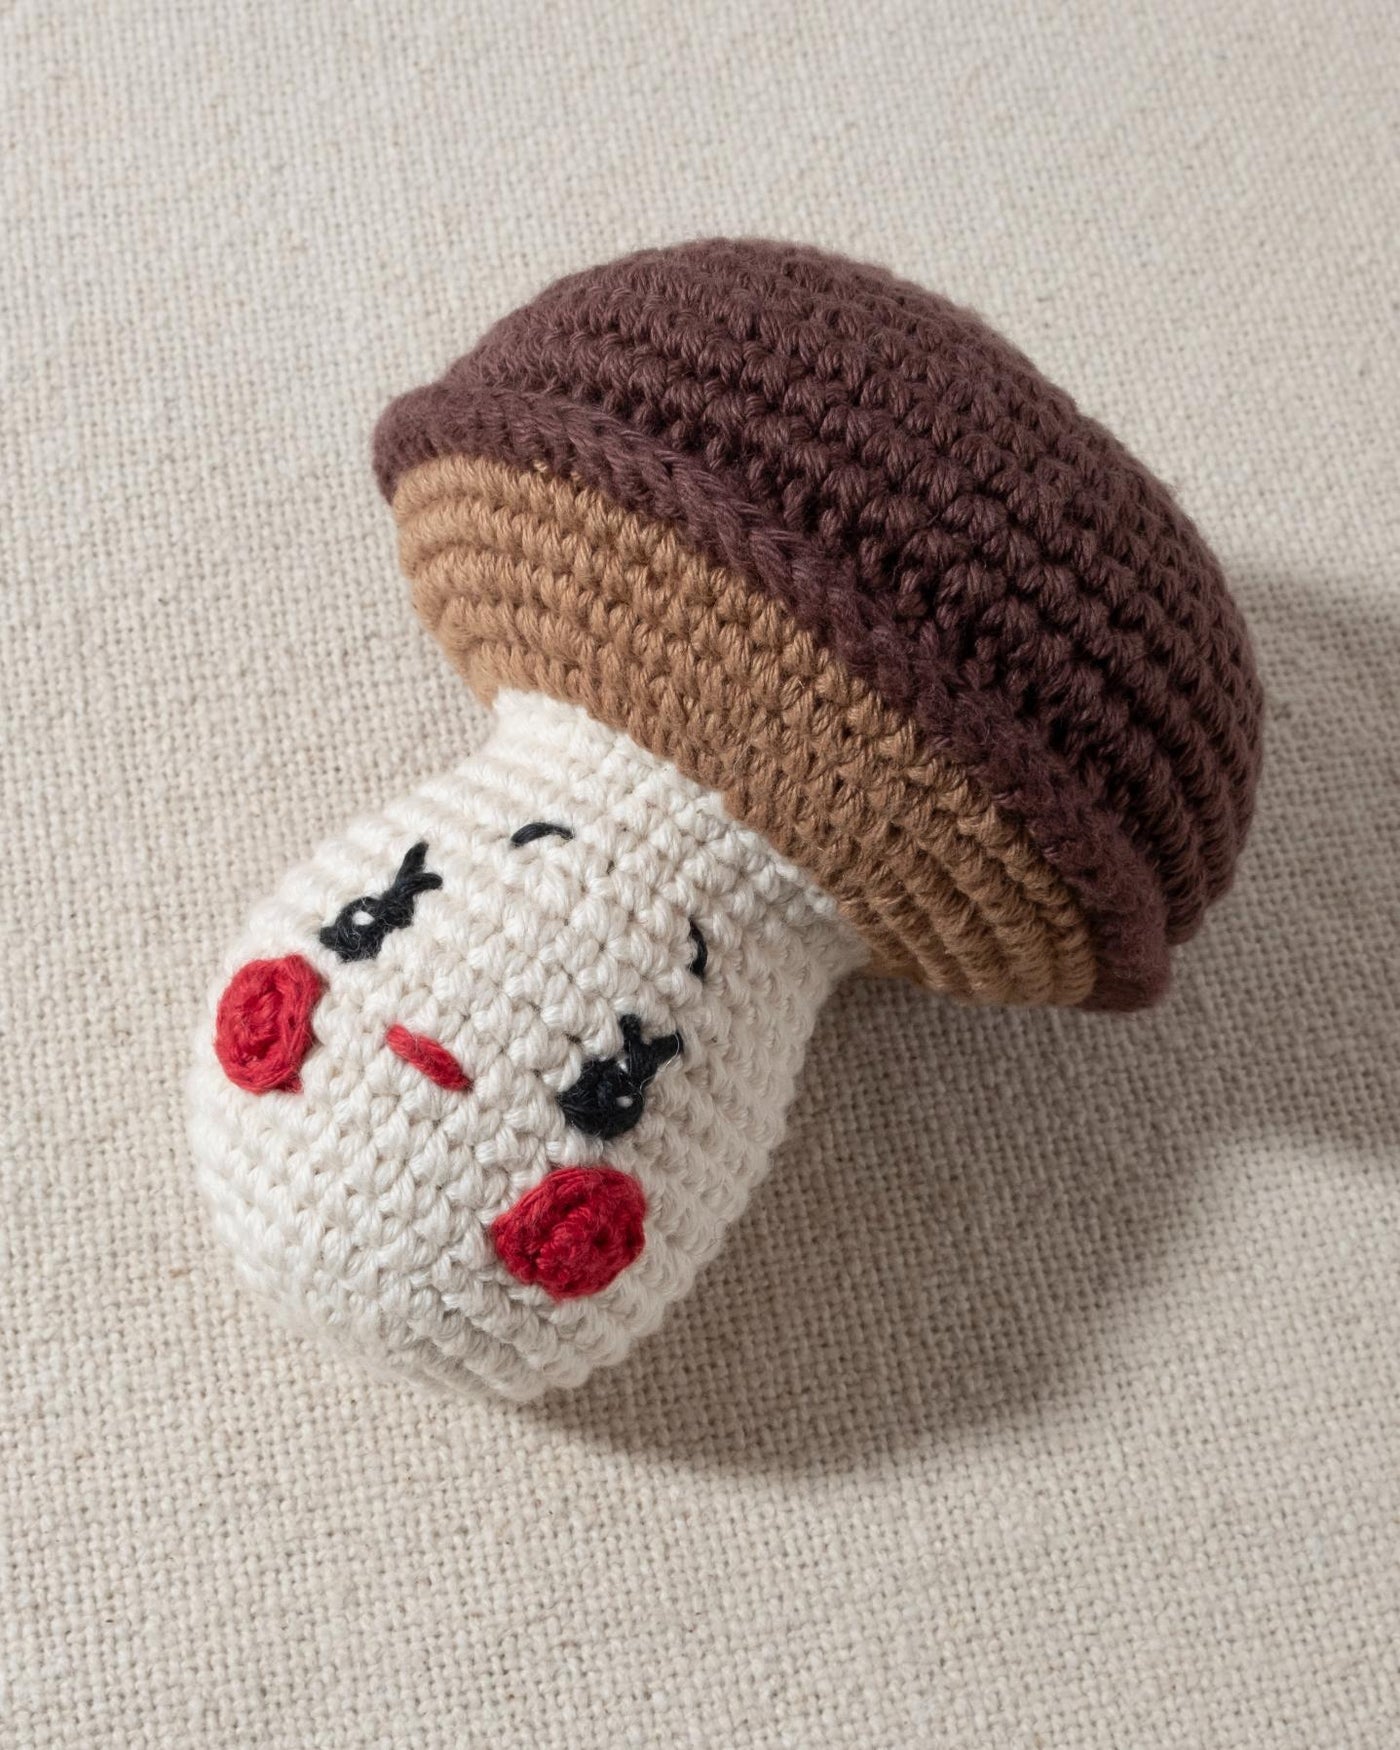 brown and ivory hand knit crochet mushroom dog toy with a smiley face and rosy cheeks